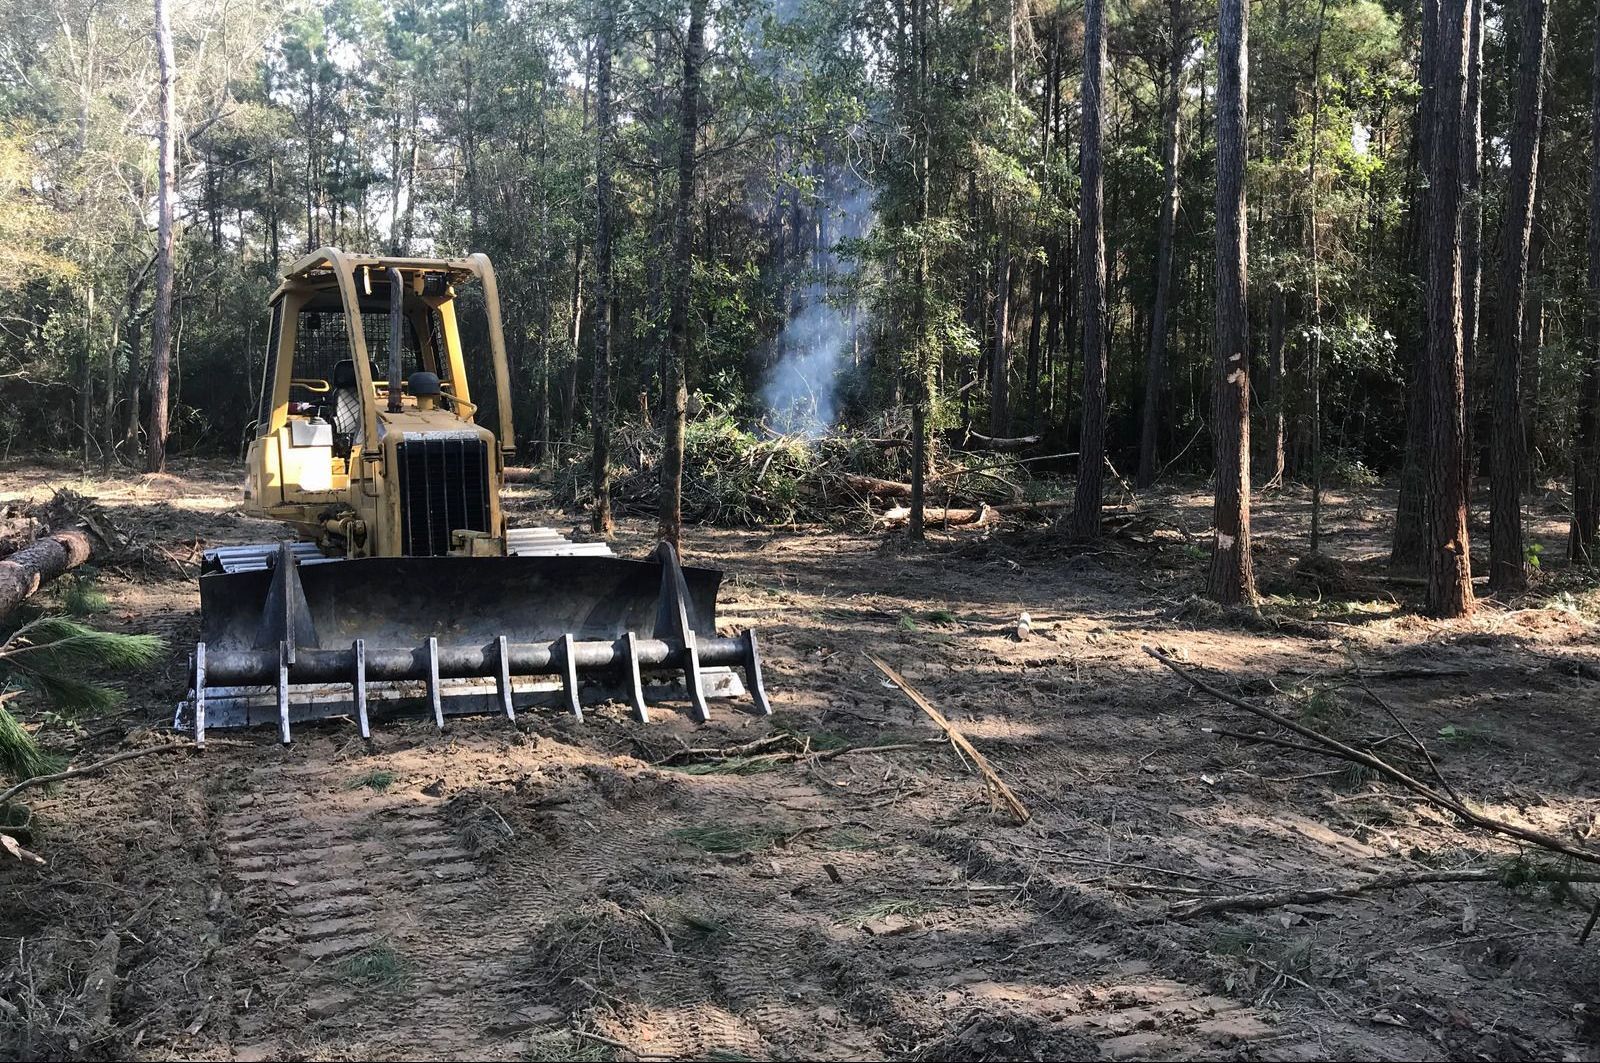 a bulldozer is in the middle of a forest in Pawley's Island, South Carolina